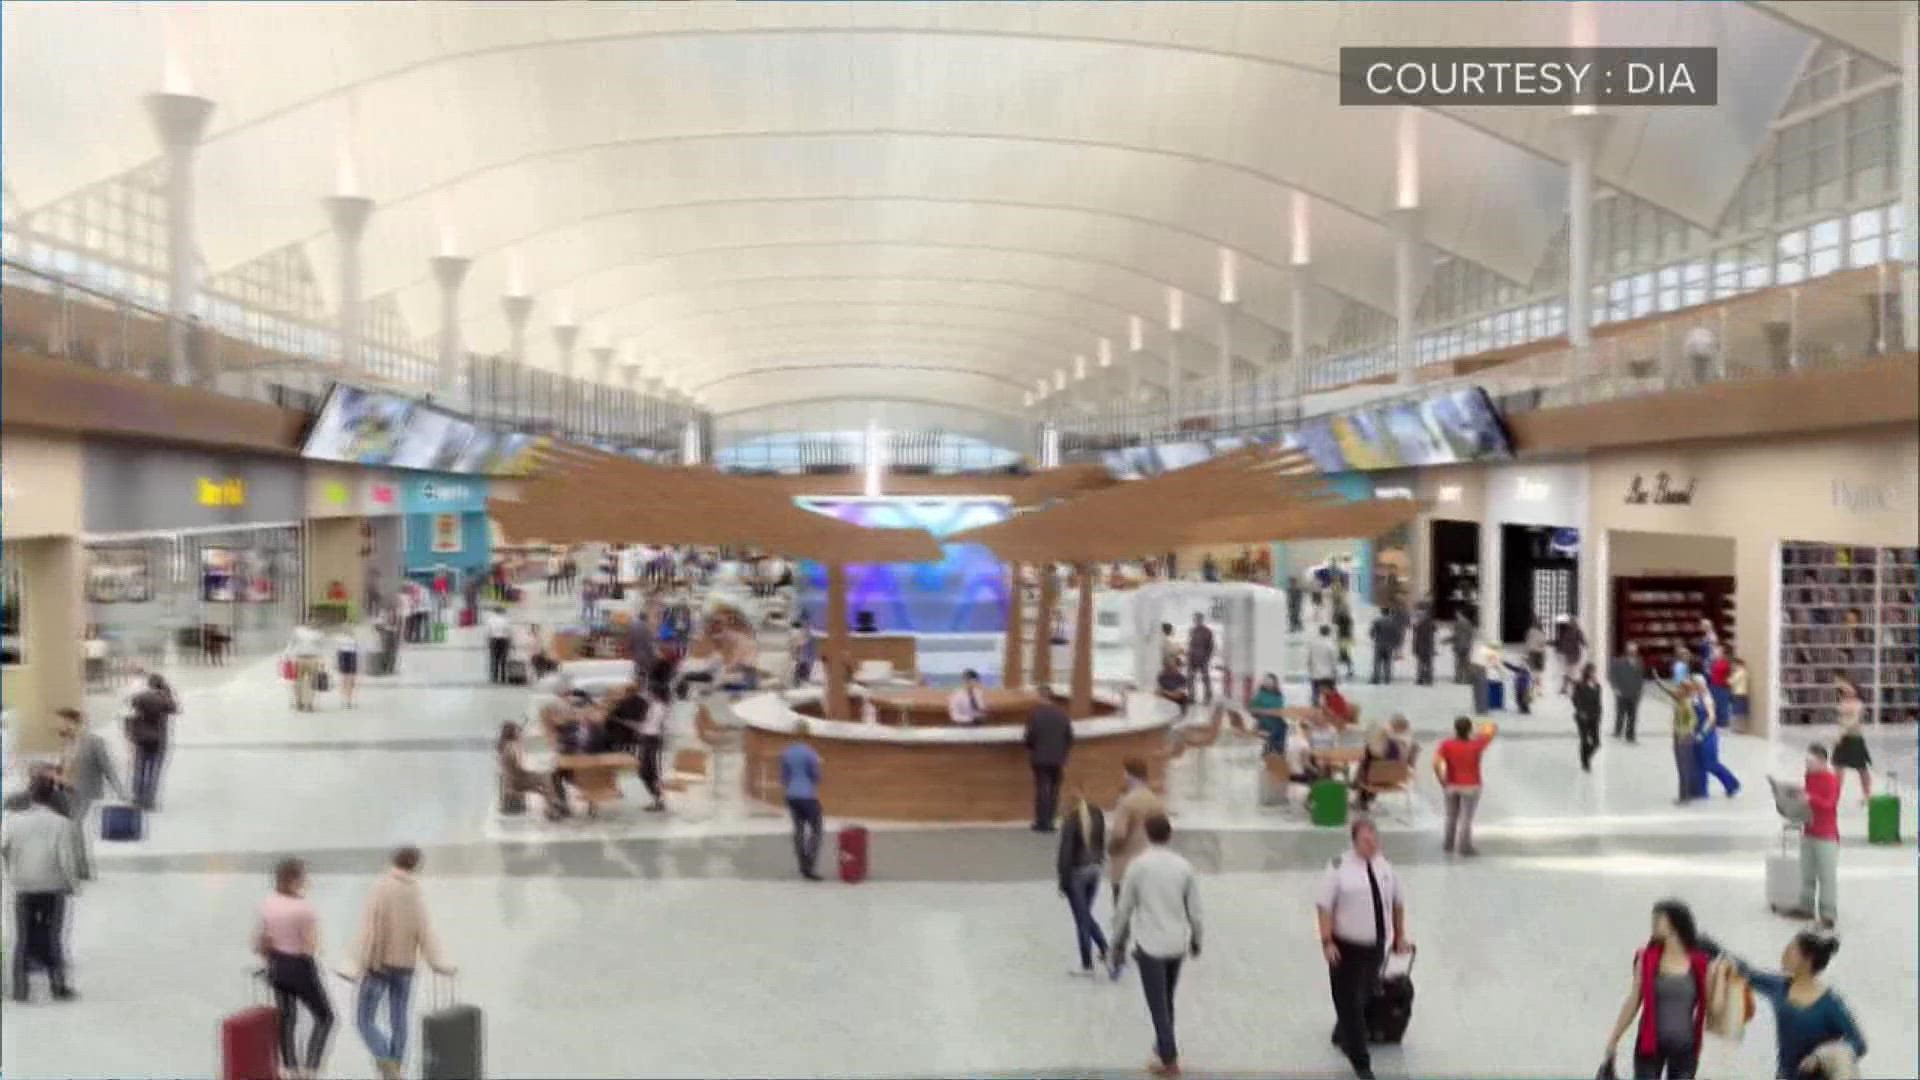 DIA said this is the most concessions developed since the airport opened in 1995.